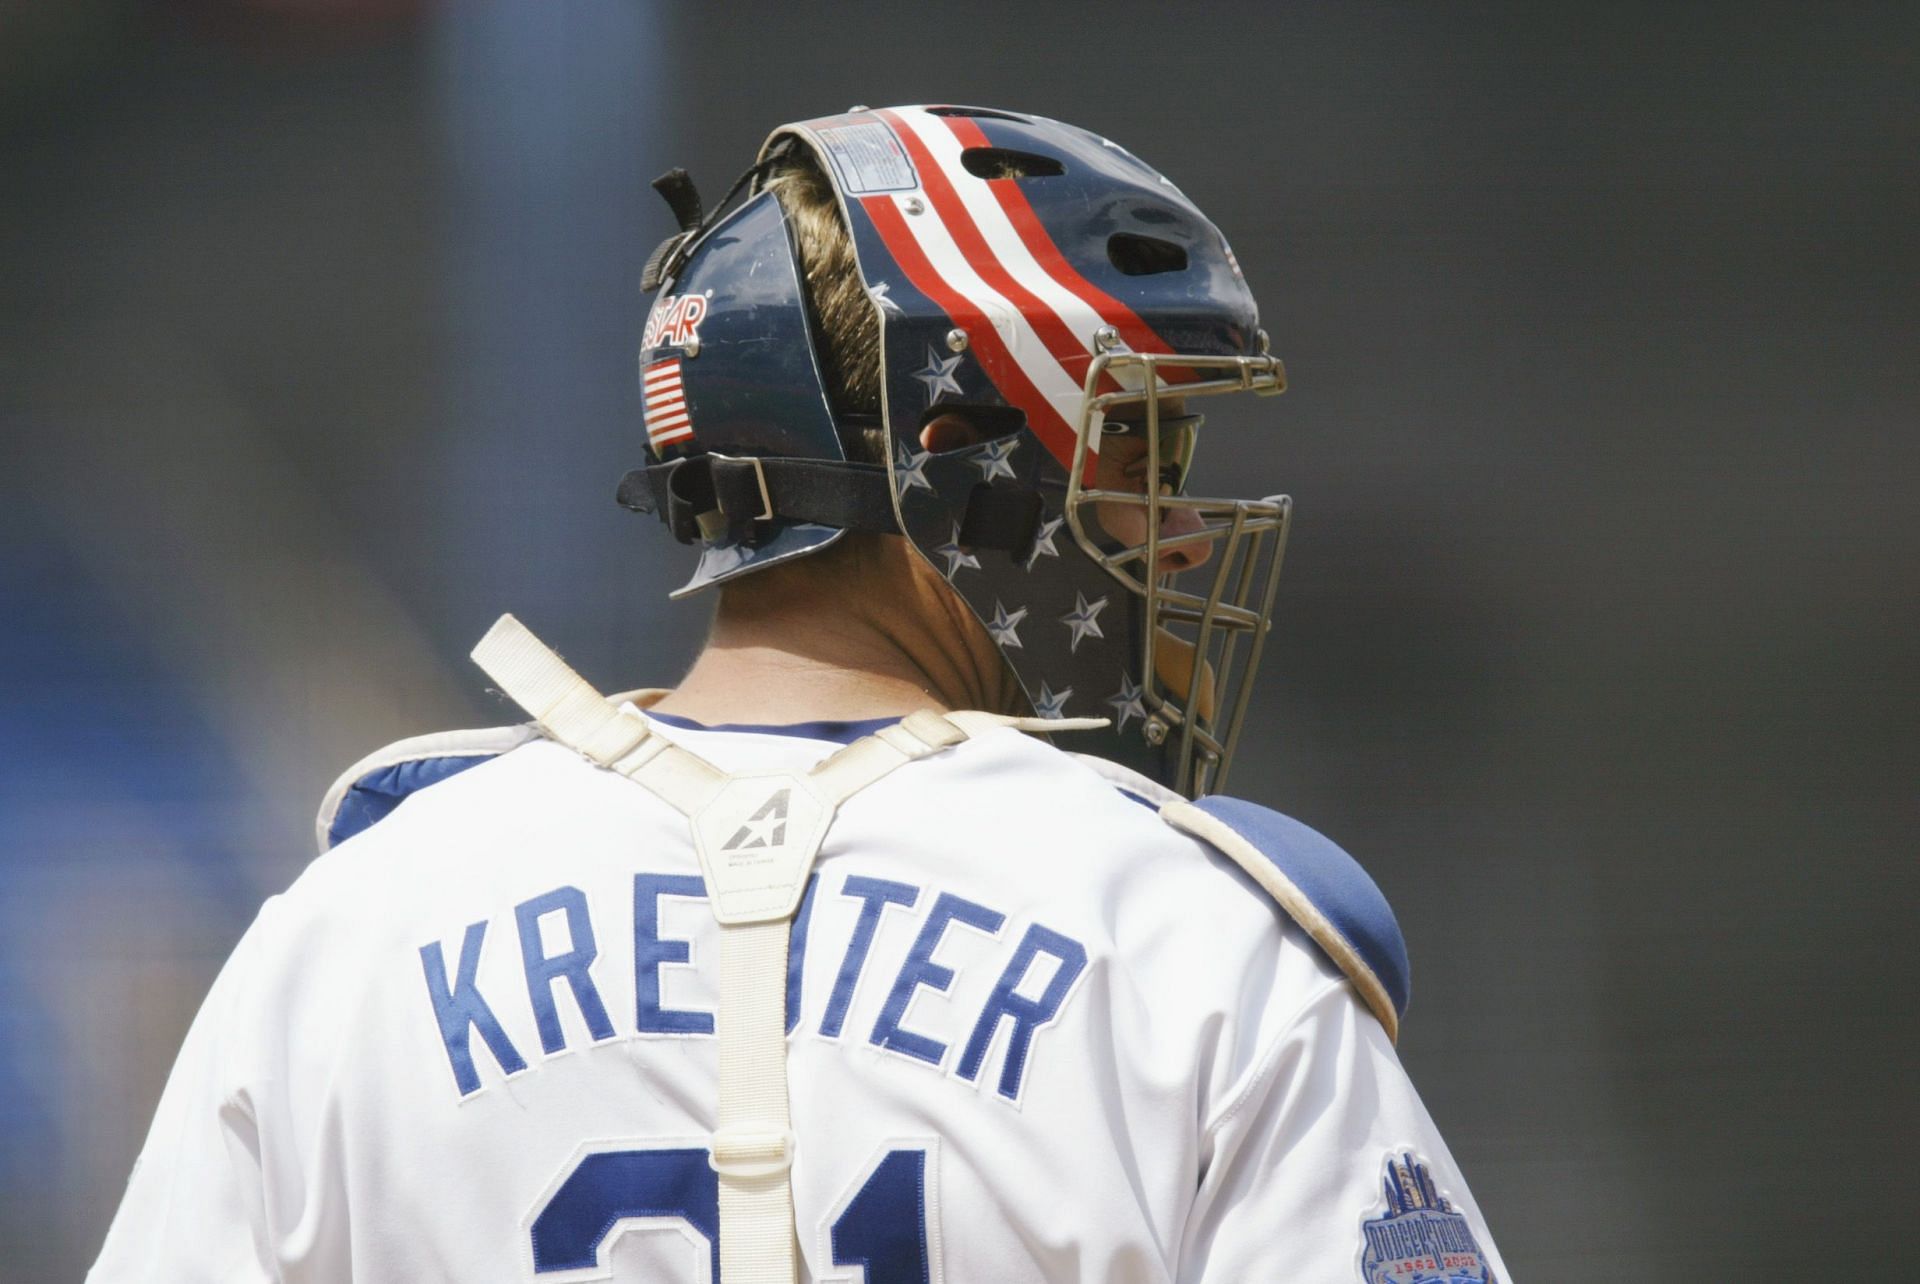 Chad Kreuter, catcher and main Dodgers player involved in the brawl